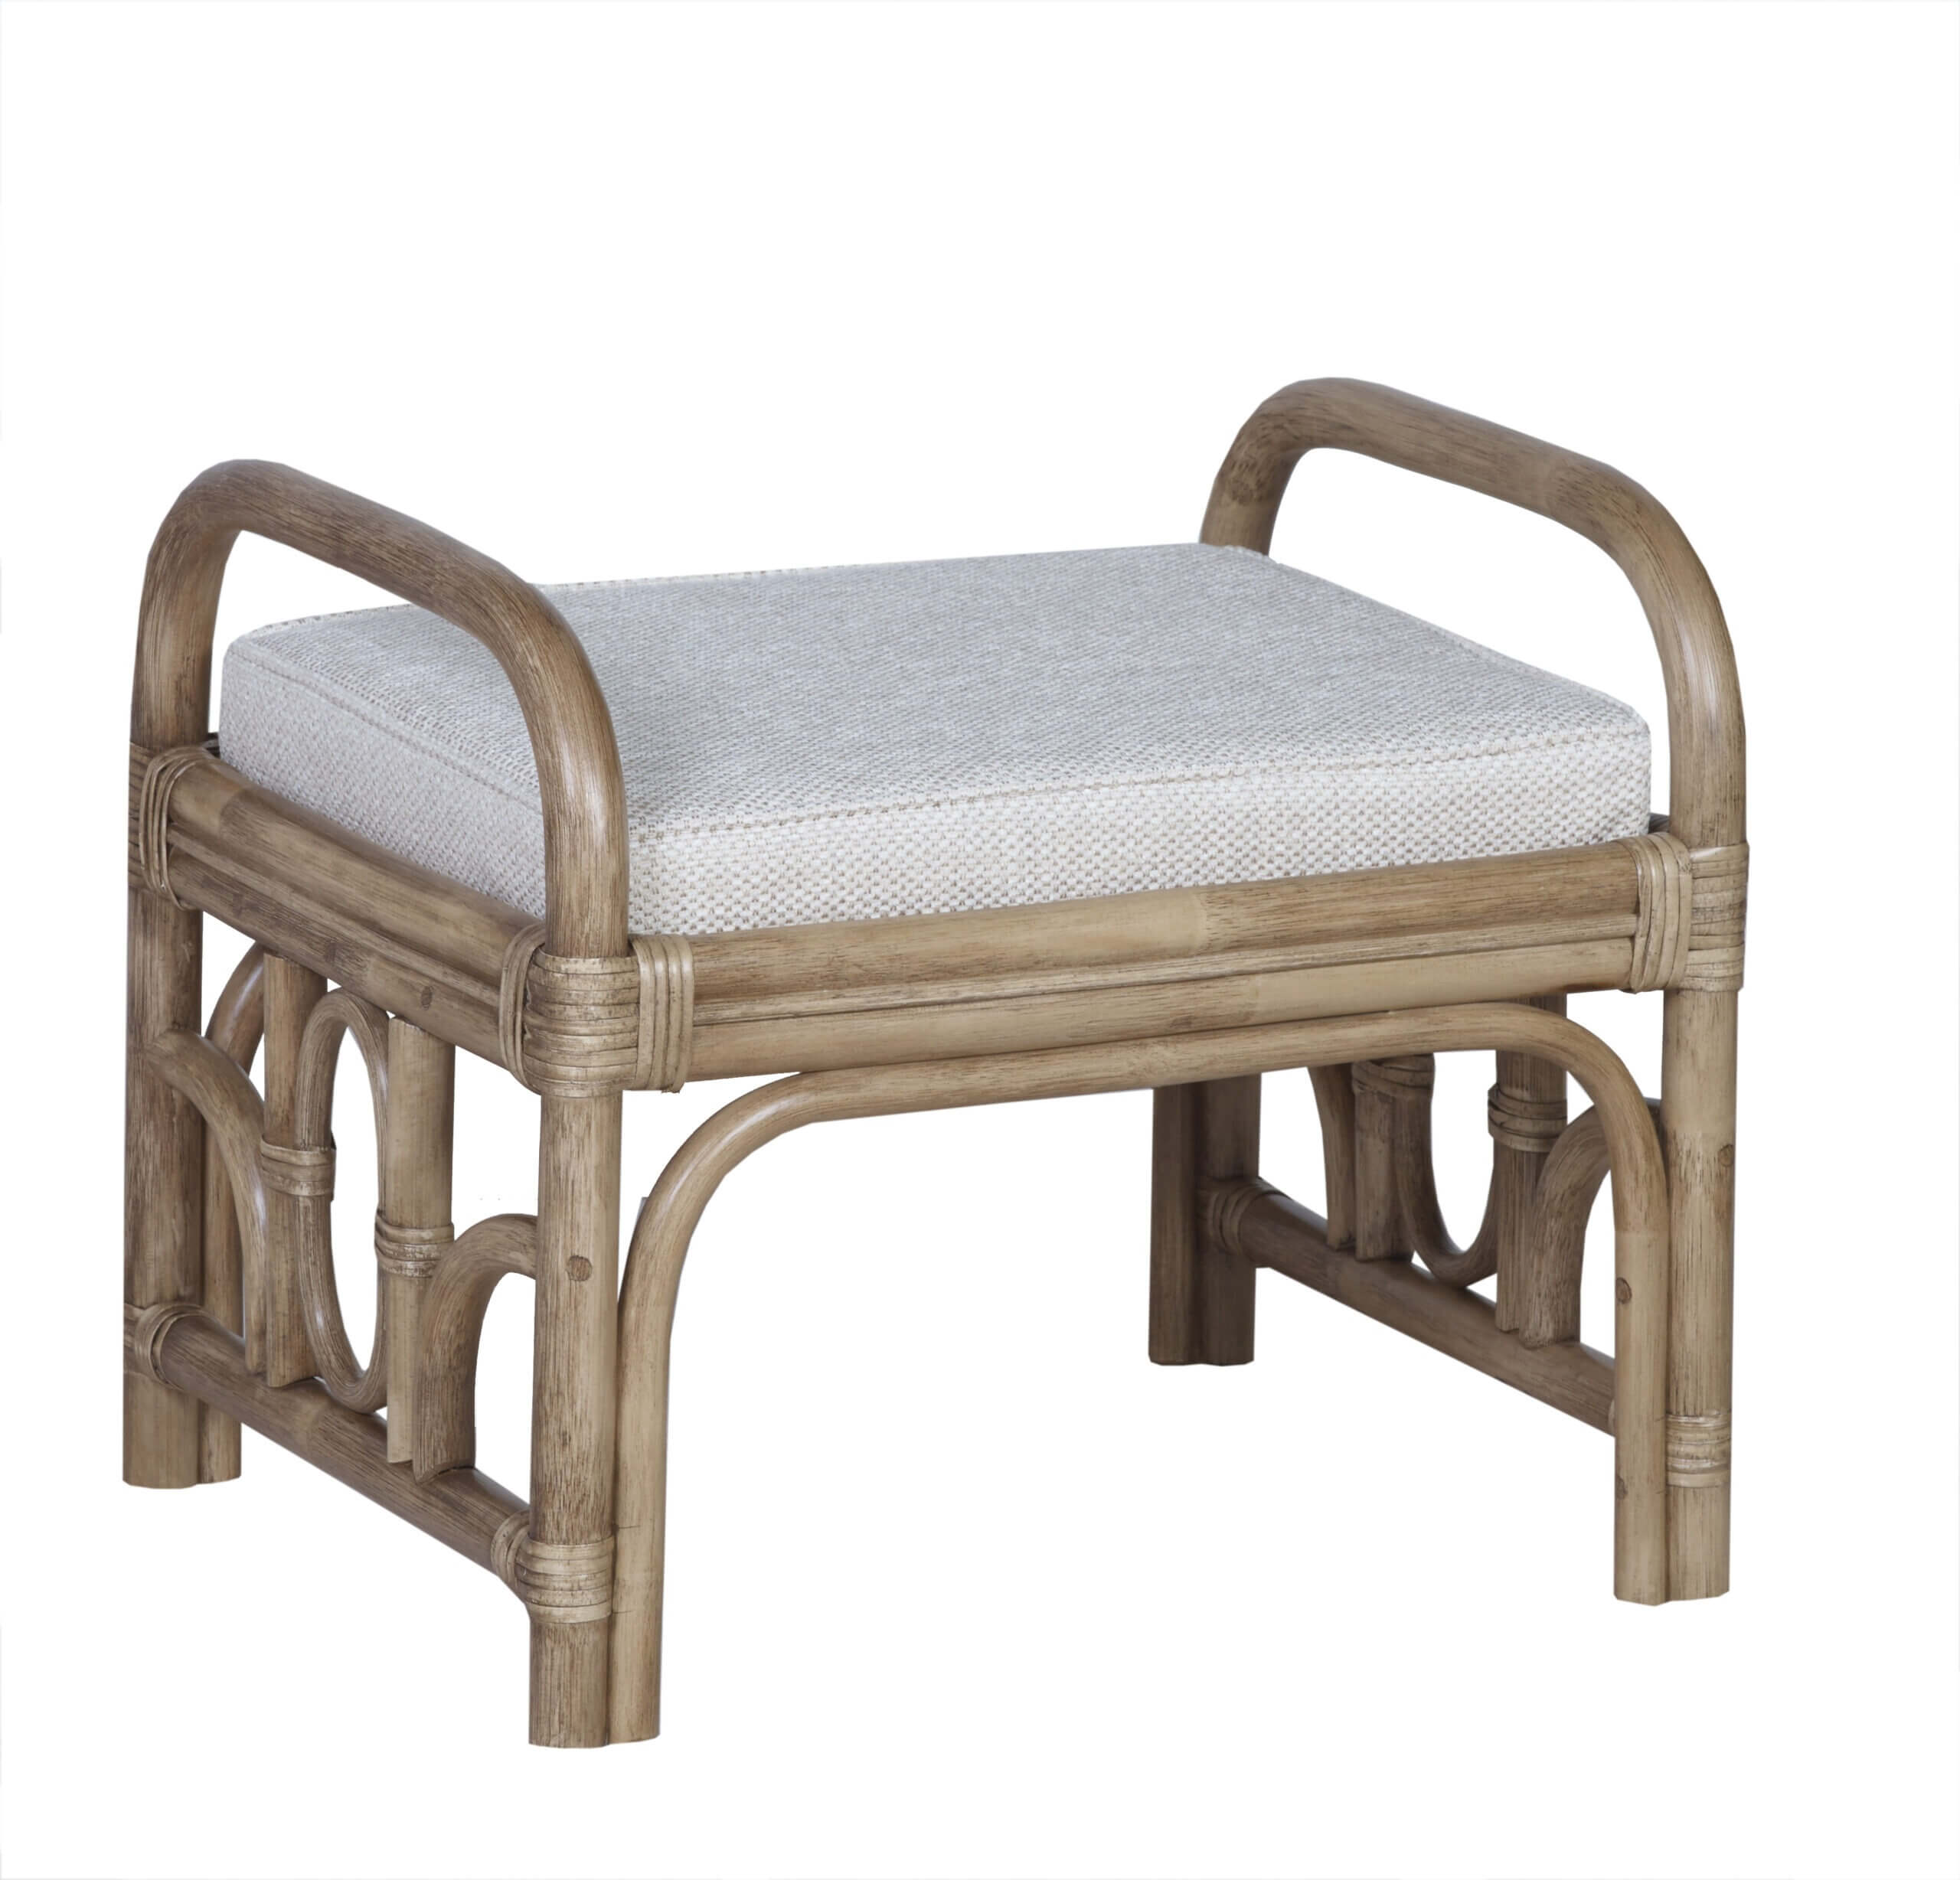 Showing image for Pesaro footstool